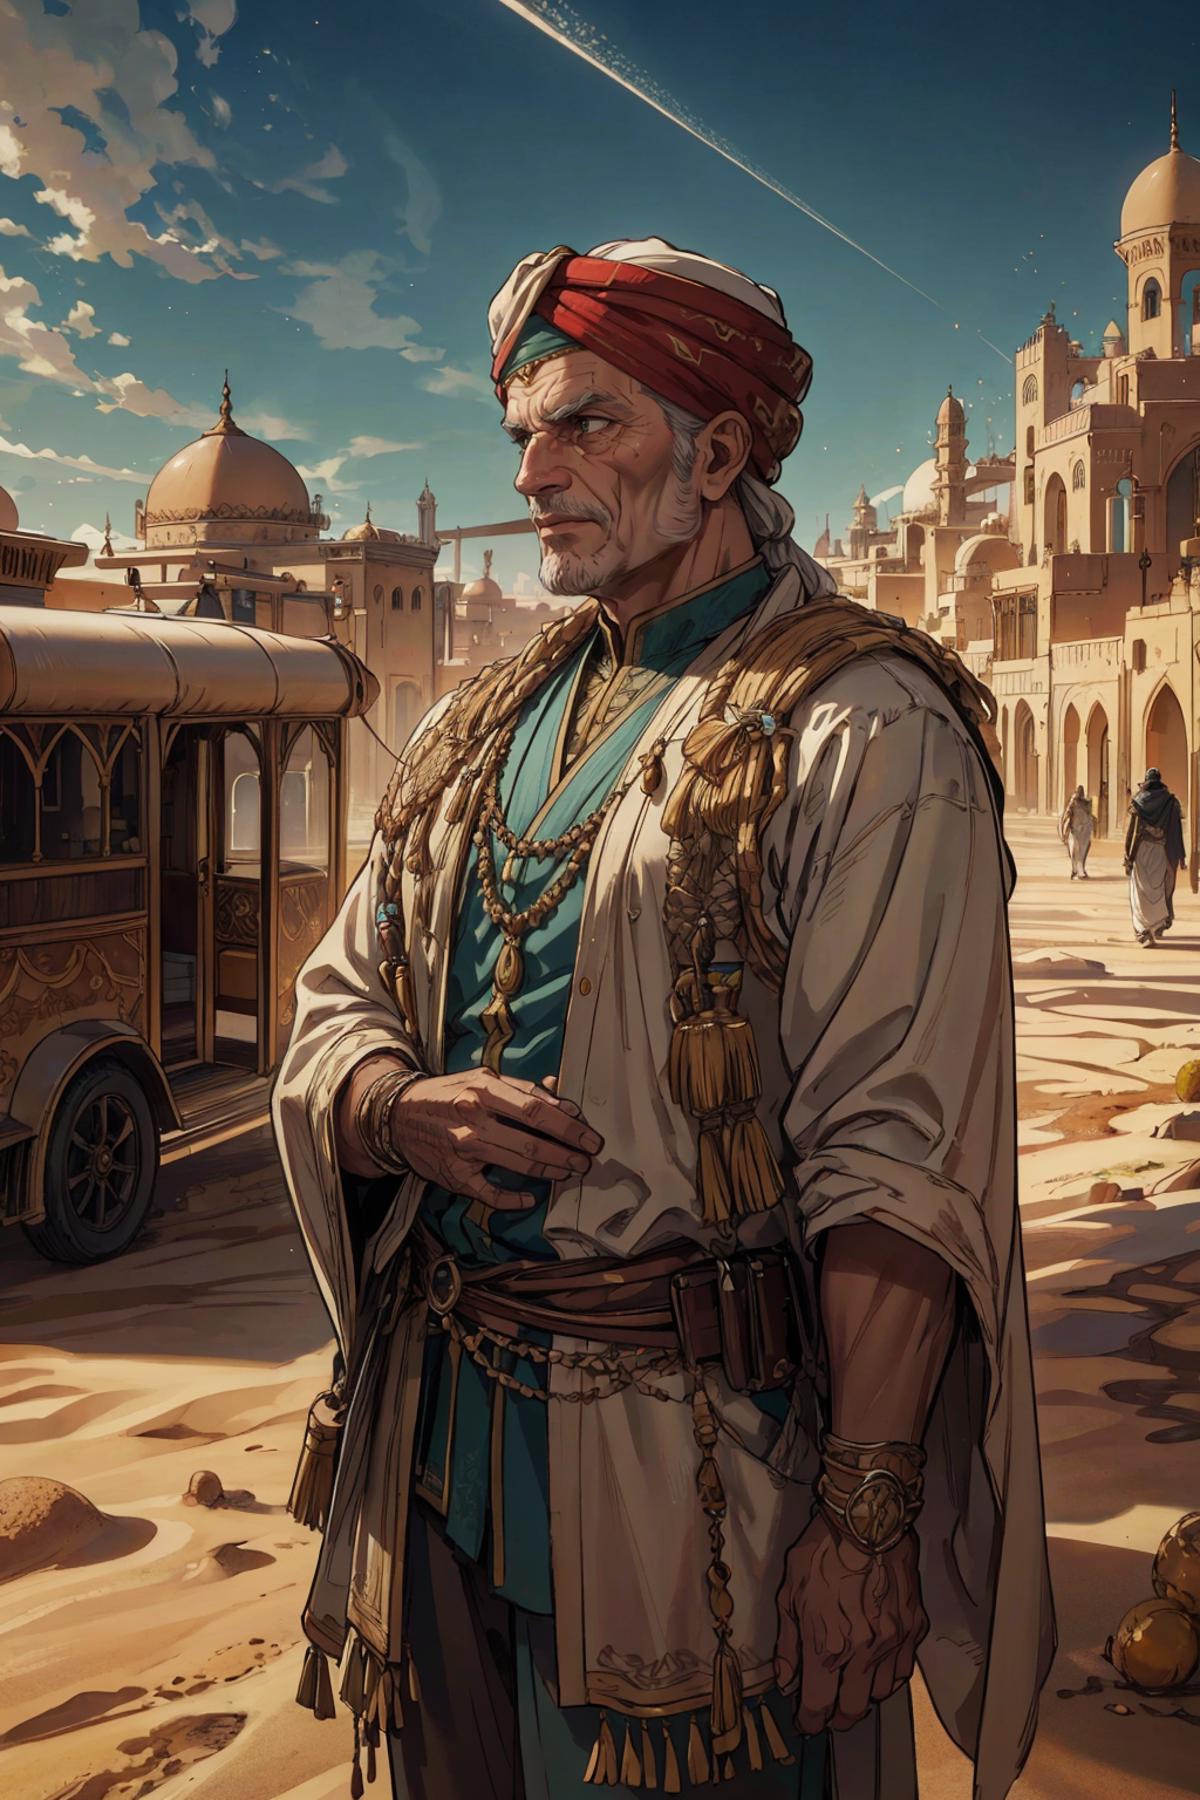 Ancient Middle Eastern Man in Robe and Turban Standing in City Street.